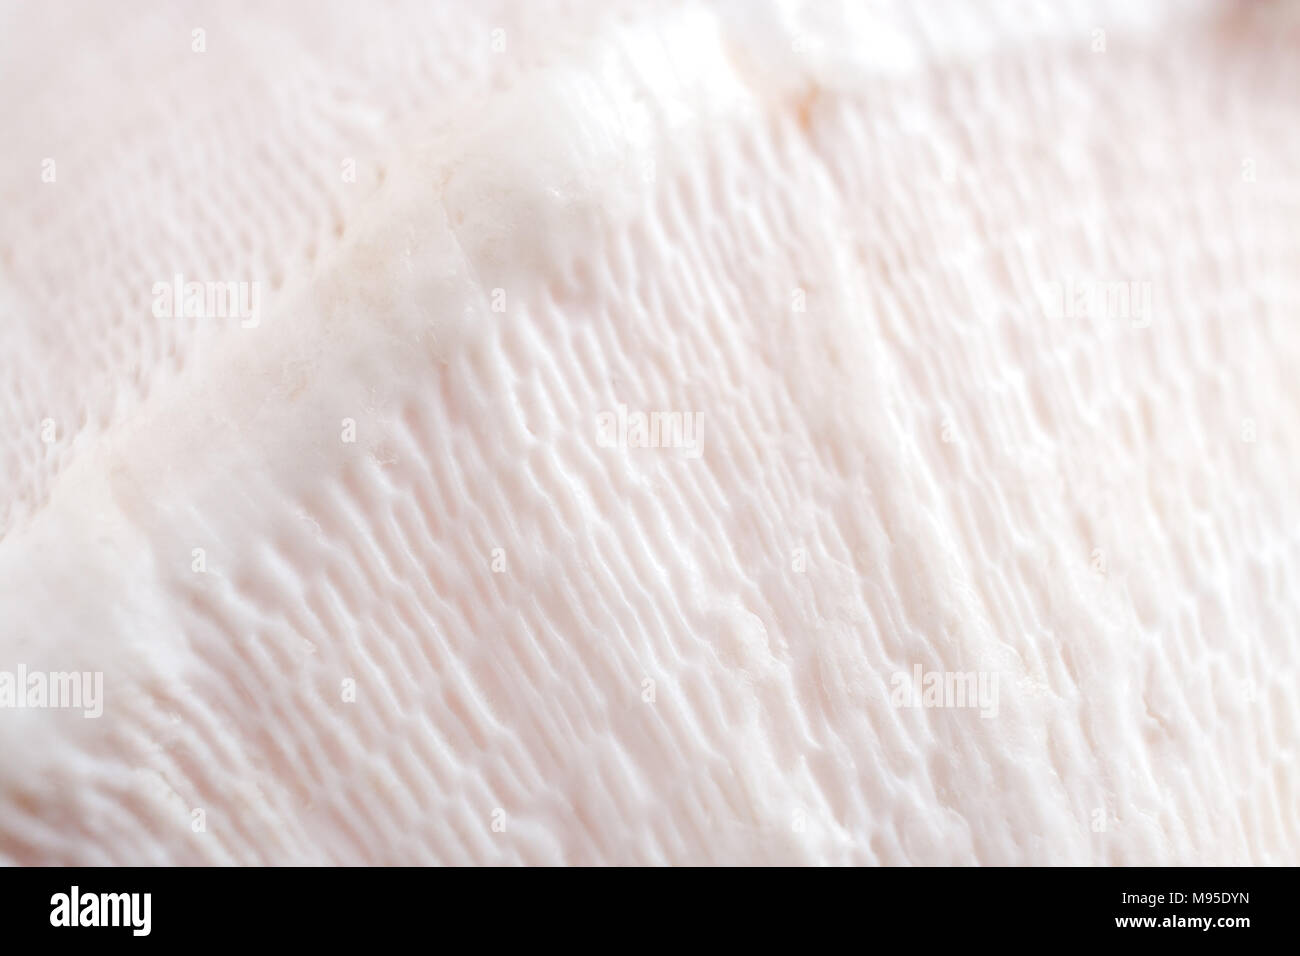 Natural abstract background. Close-up cellular structure of white seashell.  Diagonal view. Selective focus. Stock Photo